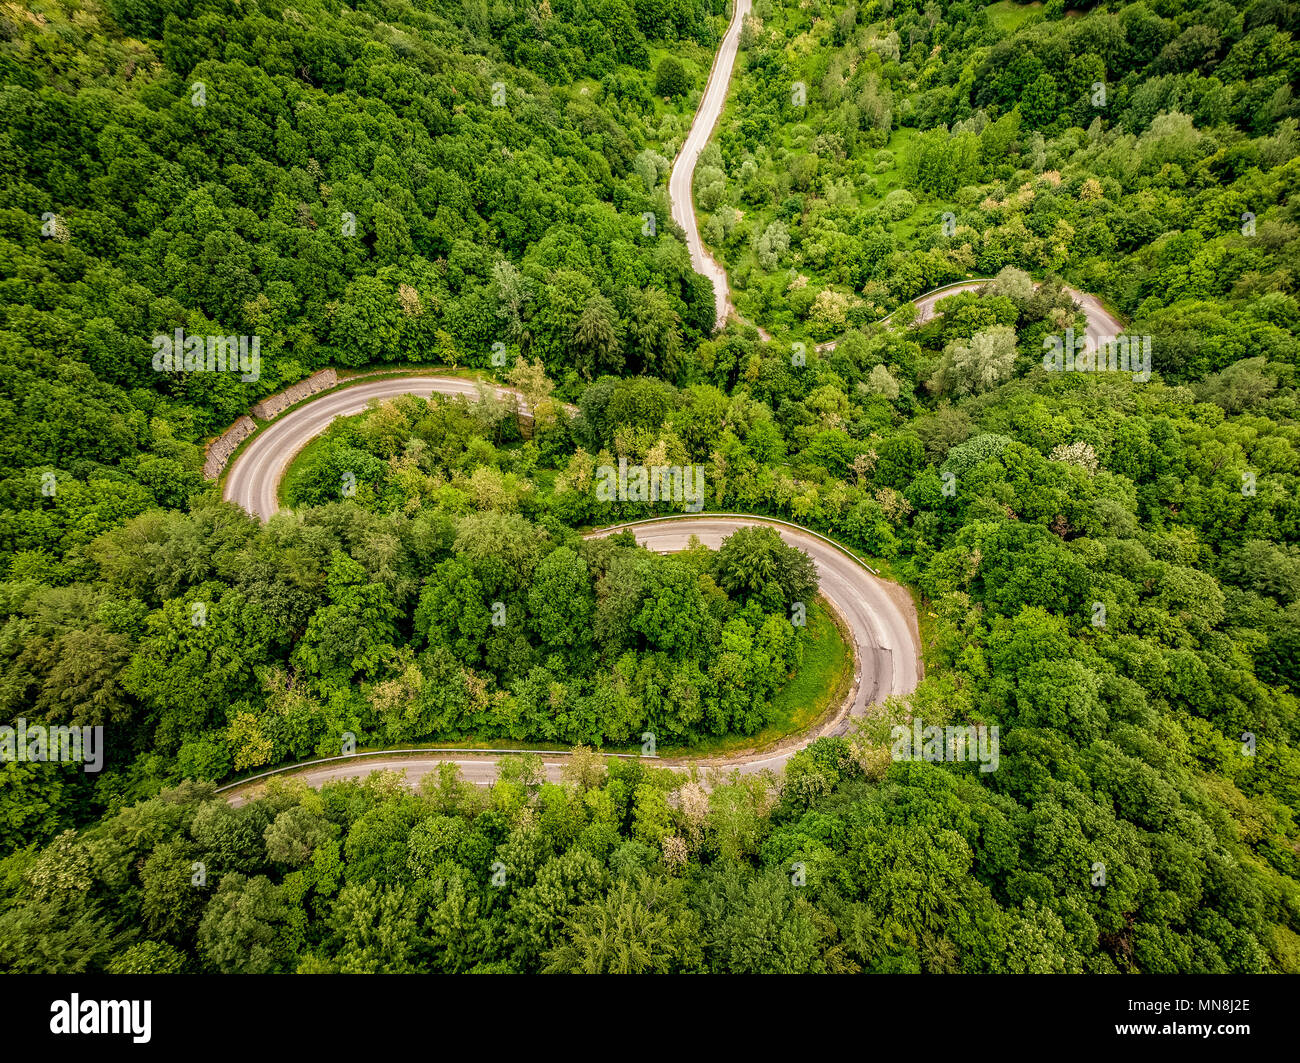 Extreme winding highway in the forest Stock Photo